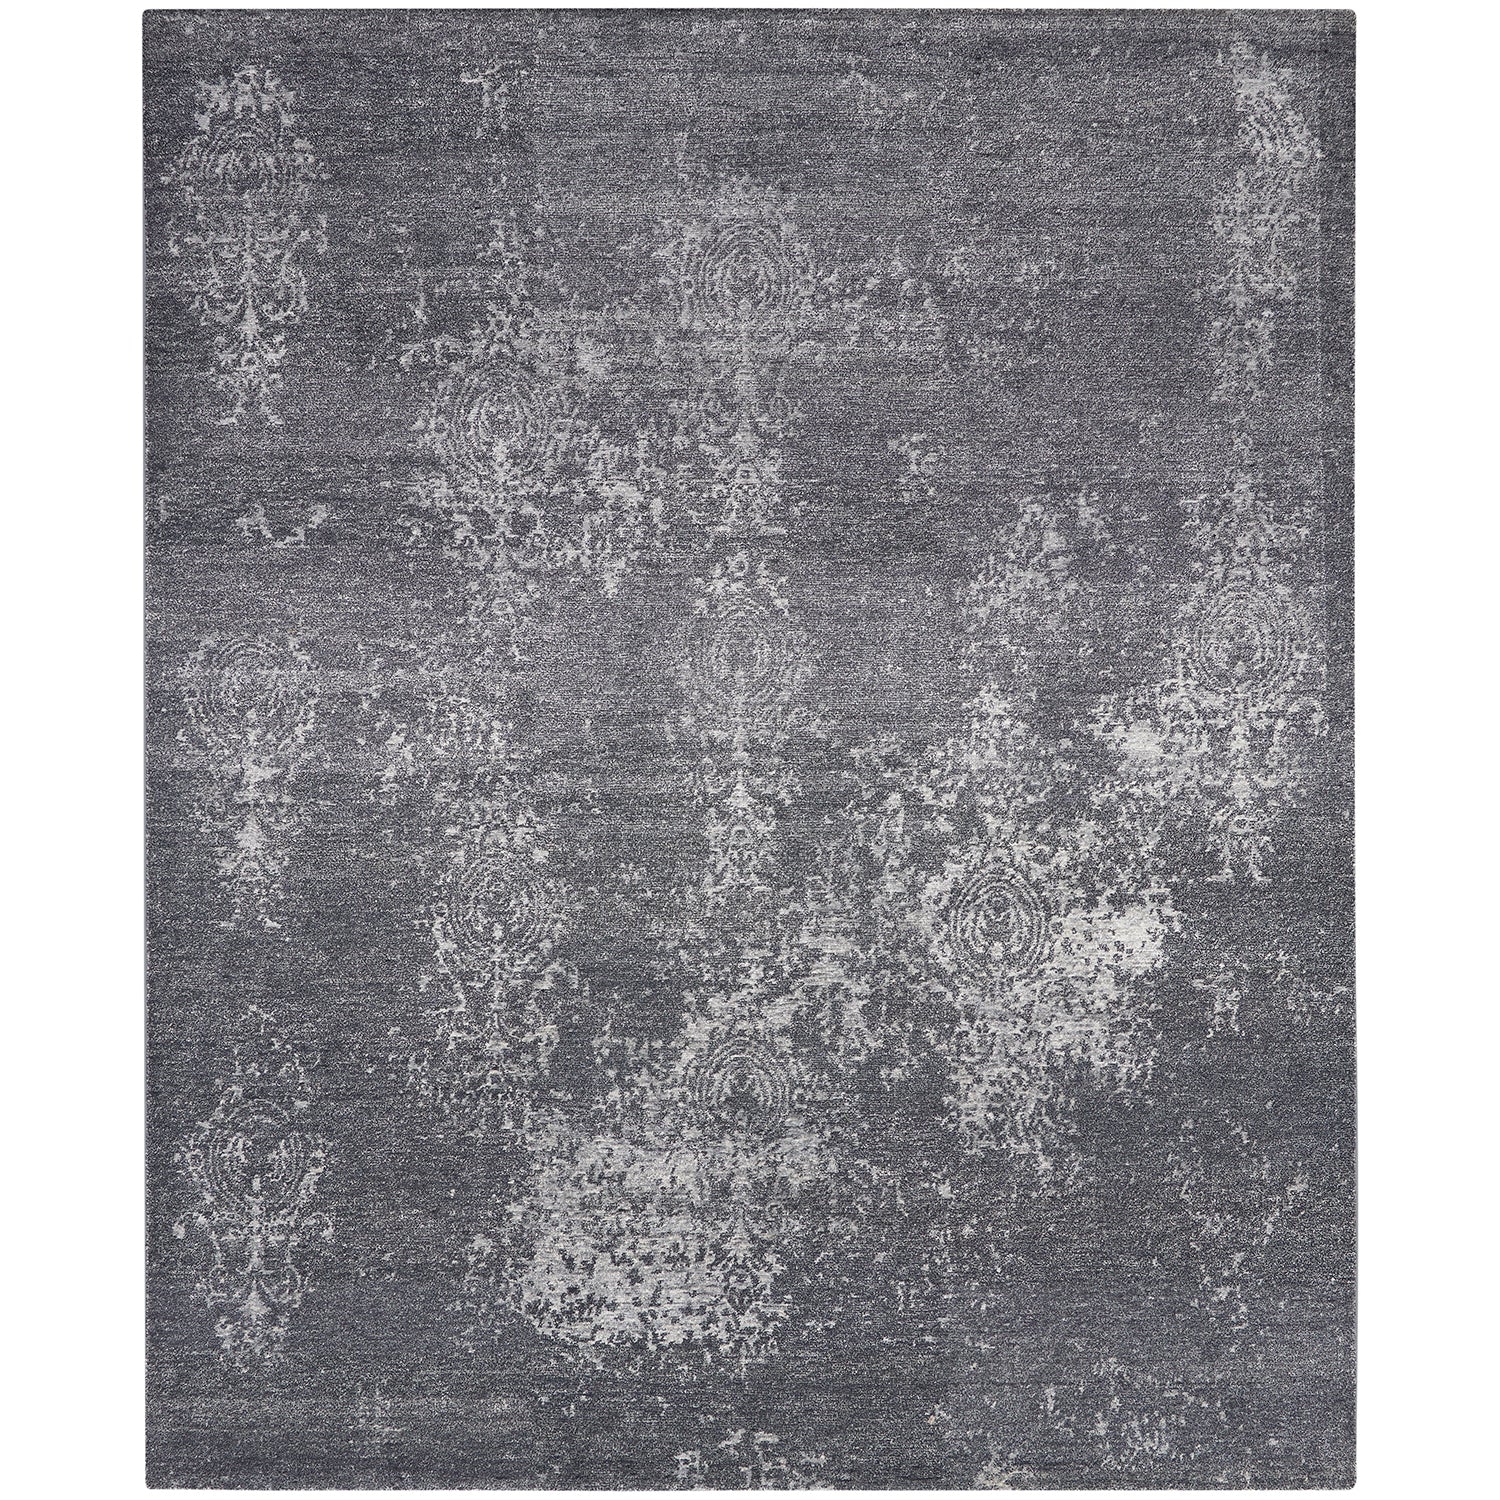 Rectangular grey area rug with distressed floral pattern for vintage charm.